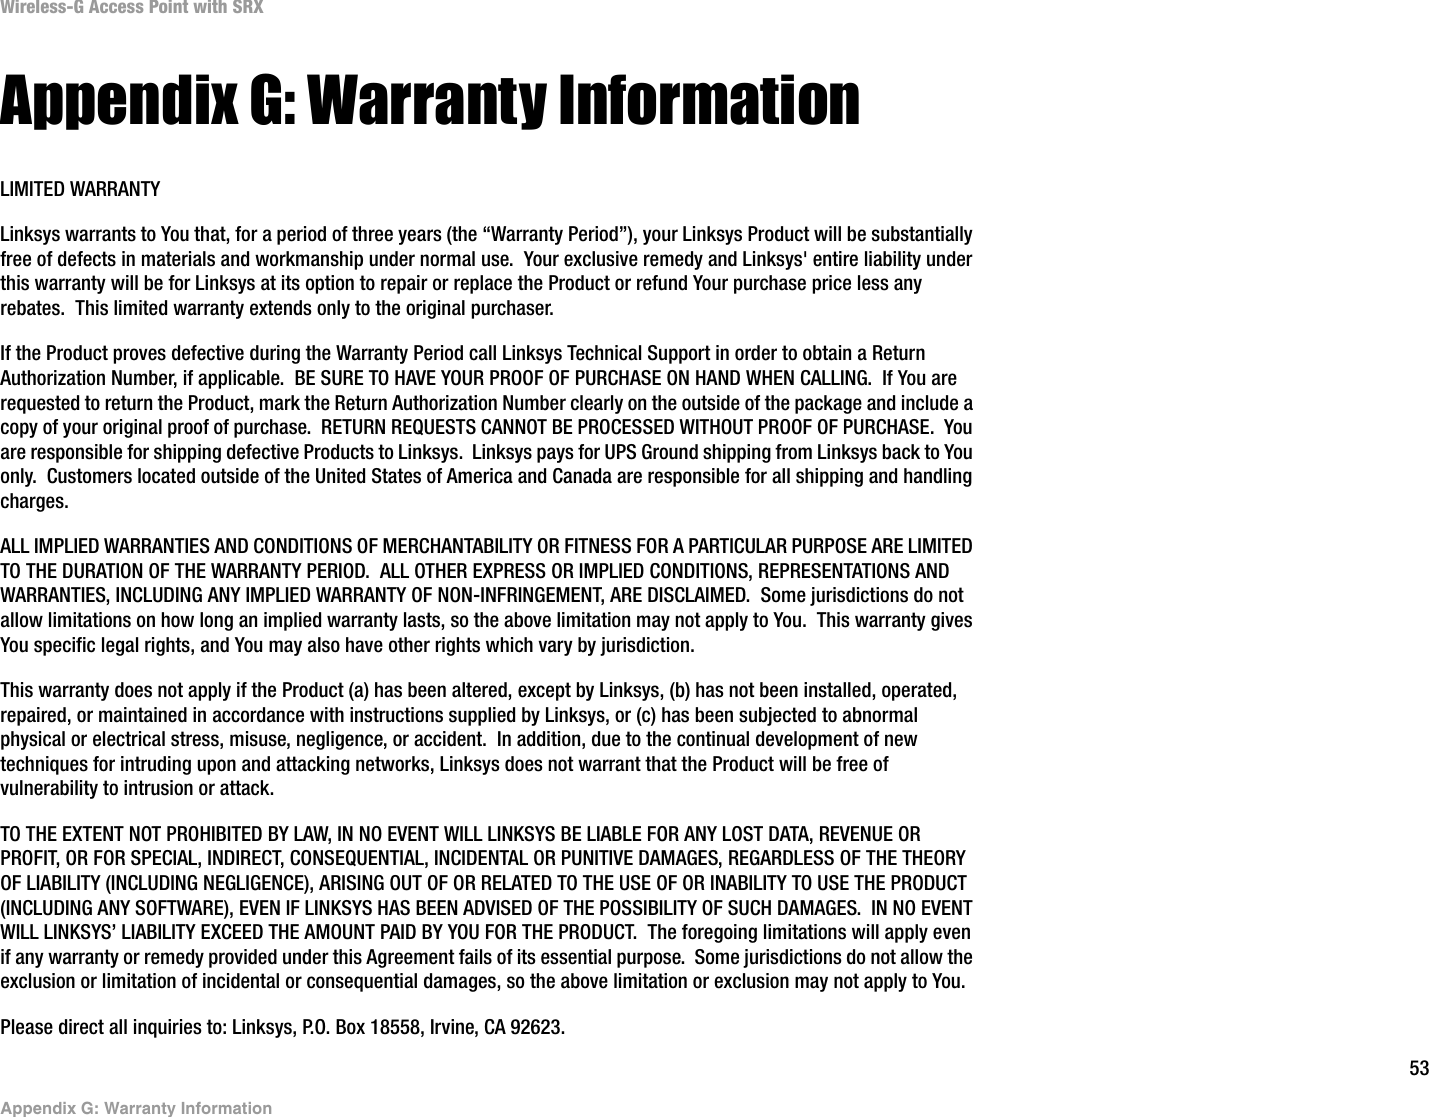 53Appendix G: Warranty InformationWireless-G Access Point with SRXAppendix G: Warranty InformationLIMITED WARRANTYLinksys warrants to You that, for a period of three years (the “Warranty Period”), your Linksys Product will be substantially free of defects in materials and workmanship under normal use.  Your exclusive remedy and Linksys&apos; entire liability under this warranty will be for Linksys at its option to repair or replace the Product or refund Your purchase price less any rebates.  This limited warranty extends only to the original purchaser.  If the Product proves defective during the Warranty Period call Linksys Technical Support in order to obtain a Return Authorization Number, if applicable.  BE SURE TO HAVE YOUR PROOF OF PURCHASE ON HAND WHEN CALLING.  If You are requested to return the Product, mark the Return Authorization Number clearly on the outside of the package and include a copy of your original proof of purchase.  RETURN REQUESTS CANNOT BE PROCESSED WITHOUT PROOF OF PURCHASE.  You are responsible for shipping defective Products to Linksys.  Linksys pays for UPS Ground shipping from Linksys back to You only.  Customers located outside of the United States of America and Canada are responsible for all shipping and handling charges. ALL IMPLIED WARRANTIES AND CONDITIONS OF MERCHANTABILITY OR FITNESS FOR A PARTICULAR PURPOSE ARE LIMITED TO THE DURATION OF THE WARRANTY PERIOD.  ALL OTHER EXPRESS OR IMPLIED CONDITIONS, REPRESENTATIONS AND WARRANTIES, INCLUDING ANY IMPLIED WARRANTY OF NON-INFRINGEMENT, ARE DISCLAIMED.  Some jurisdictions do not allow limitations on how long an implied warranty lasts, so the above limitation may not apply to You.  This warranty gives You specific legal rights, and You may also have other rights which vary by jurisdiction.This warranty does not apply if the Product (a) has been altered, except by Linksys, (b) has not been installed, operated, repaired, or maintained in accordance with instructions supplied by Linksys, or (c) has been subjected to abnormal physical or electrical stress, misuse, negligence, or accident.  In addition, due to the continual development of new techniques for intruding upon and attacking networks, Linksys does not warrant that the Product will be free of vulnerability to intrusion or attack.TO THE EXTENT NOT PROHIBITED BY LAW, IN NO EVENT WILL LINKSYS BE LIABLE FOR ANY LOST DATA, REVENUE OR PROFIT, OR FOR SPECIAL, INDIRECT, CONSEQUENTIAL, INCIDENTAL OR PUNITIVE DAMAGES, REGARDLESS OF THE THEORY OF LIABILITY (INCLUDING NEGLIGENCE), ARISING OUT OF OR RELATED TO THE USE OF OR INABILITY TO USE THE PRODUCT (INCLUDING ANY SOFTWARE), EVEN IF LINKSYS HAS BEEN ADVISED OF THE POSSIBILITY OF SUCH DAMAGES.  IN NO EVENT WILL LINKSYS’ LIABILITY EXCEED THE AMOUNT PAID BY YOU FOR THE PRODUCT.  The foregoing limitations will apply even if any warranty or remedy provided under this Agreement fails of its essential purpose.  Some jurisdictions do not allow the exclusion or limitation of incidental or consequential damages, so the above limitation or exclusion may not apply to You.Please direct all inquiries to: Linksys, P.O. Box 18558, Irvine, CA 92623.